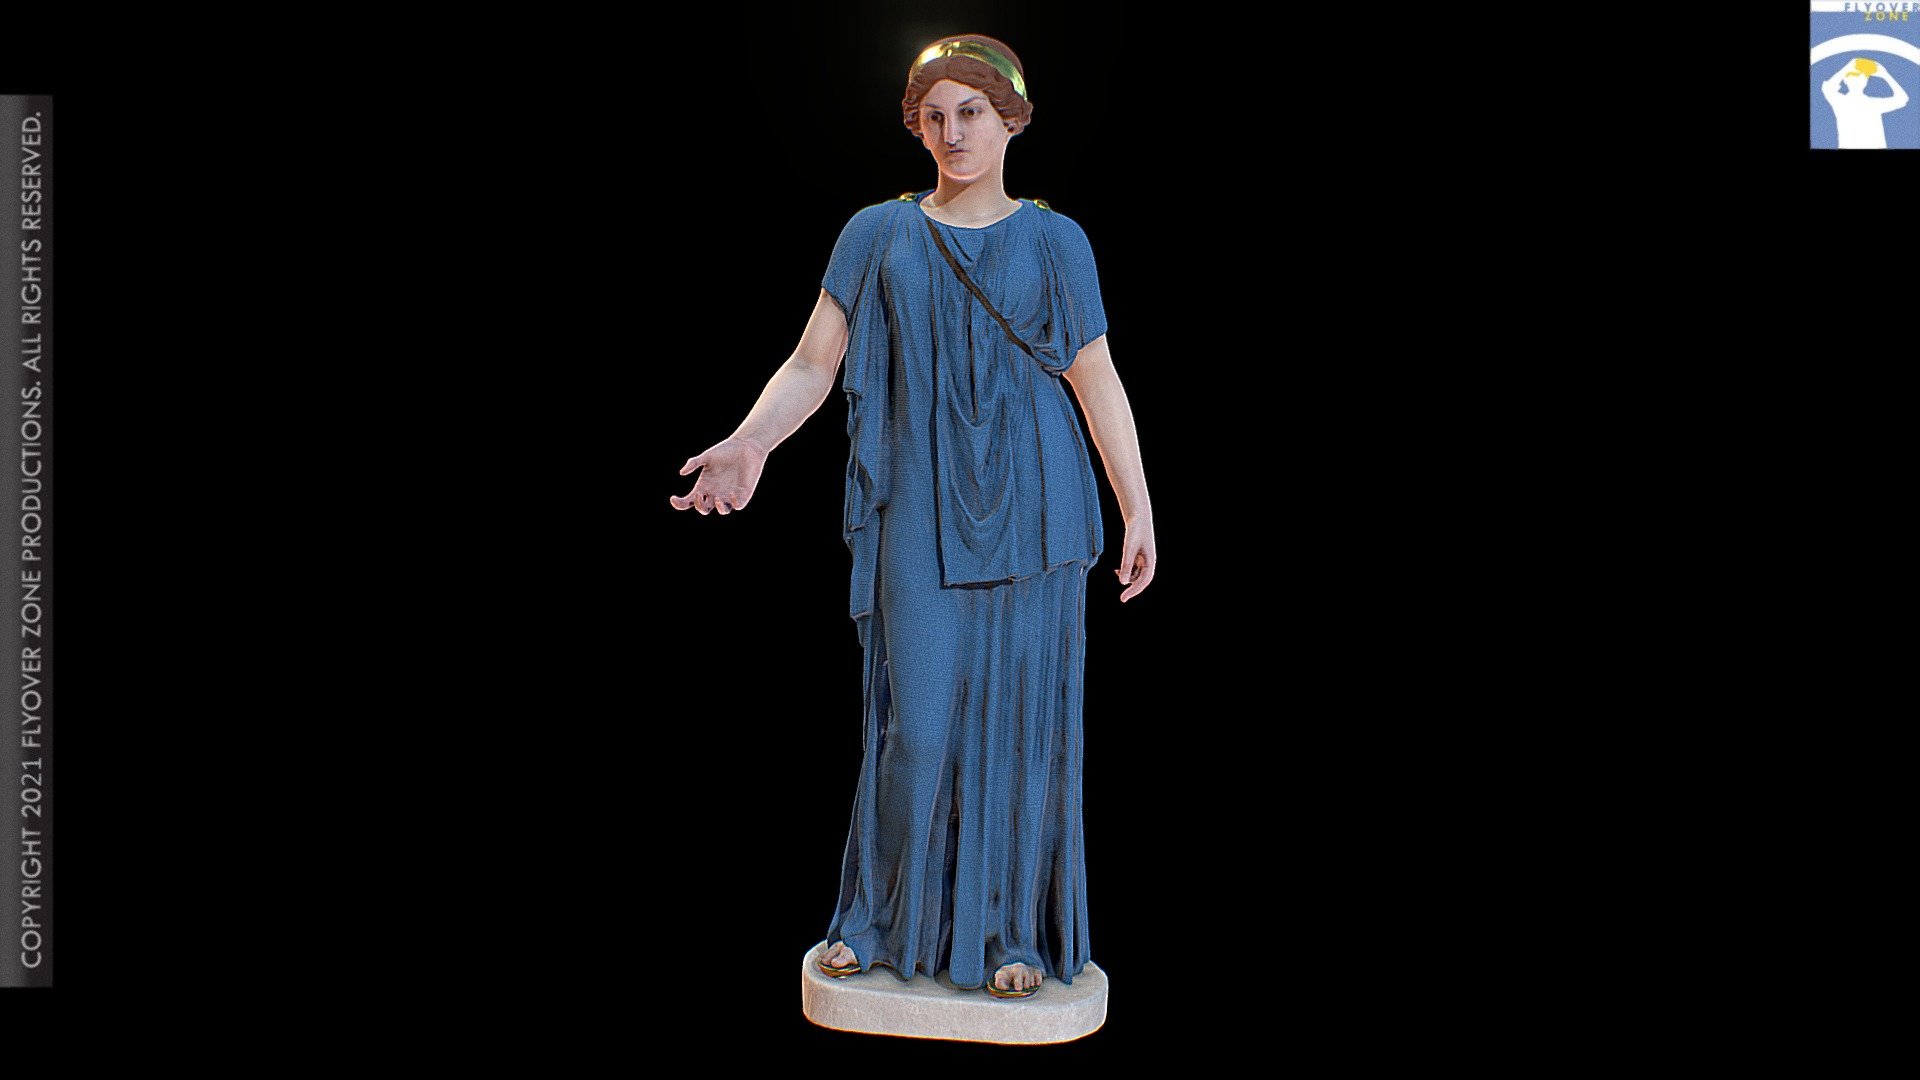 Name: Artemis, Dresden type, restored as Erato

Material: Cast (plaster of Paris)

Format: Statue

Museum: By permission of the Museo dell’Arte Classica, Sapienza University, Rome

Museum inventory number: 793

Museum of original: Paris, Louvre

Photographer/Modeler: Carter Conaway

Restorer: Mohamed Abdelaziz

More information, click here  

Copyright 2022 Flyover Zone Productions. All rights reserved.
 - Female Divinity (restored) - 3D model by Flyover Zone (@FlyoverZone) 3d model